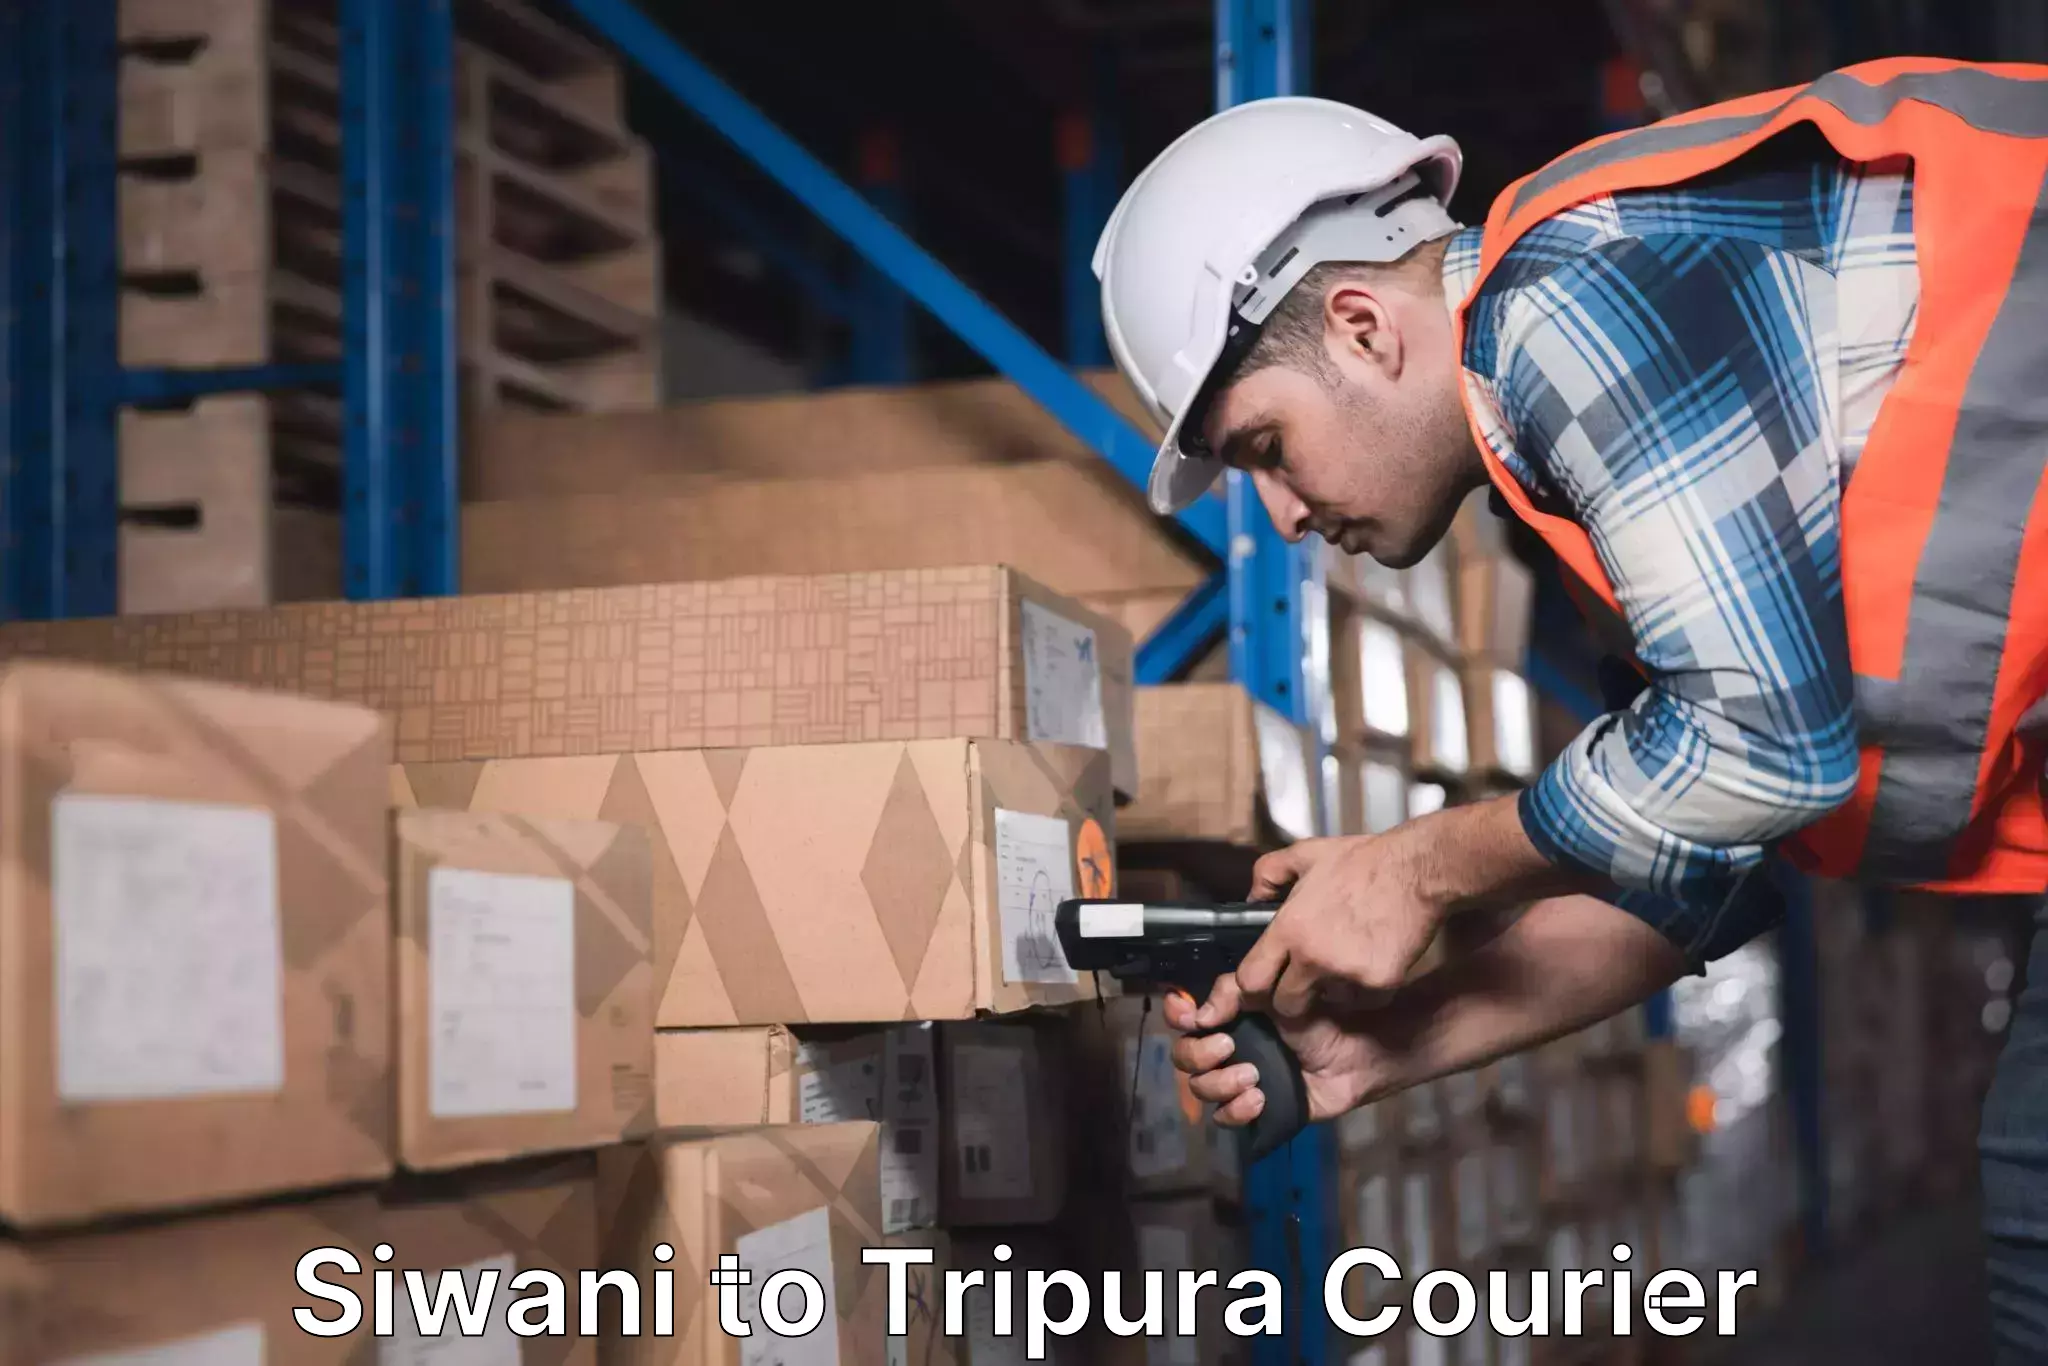 Efficient freight service Siwani to Udaipur Tripura